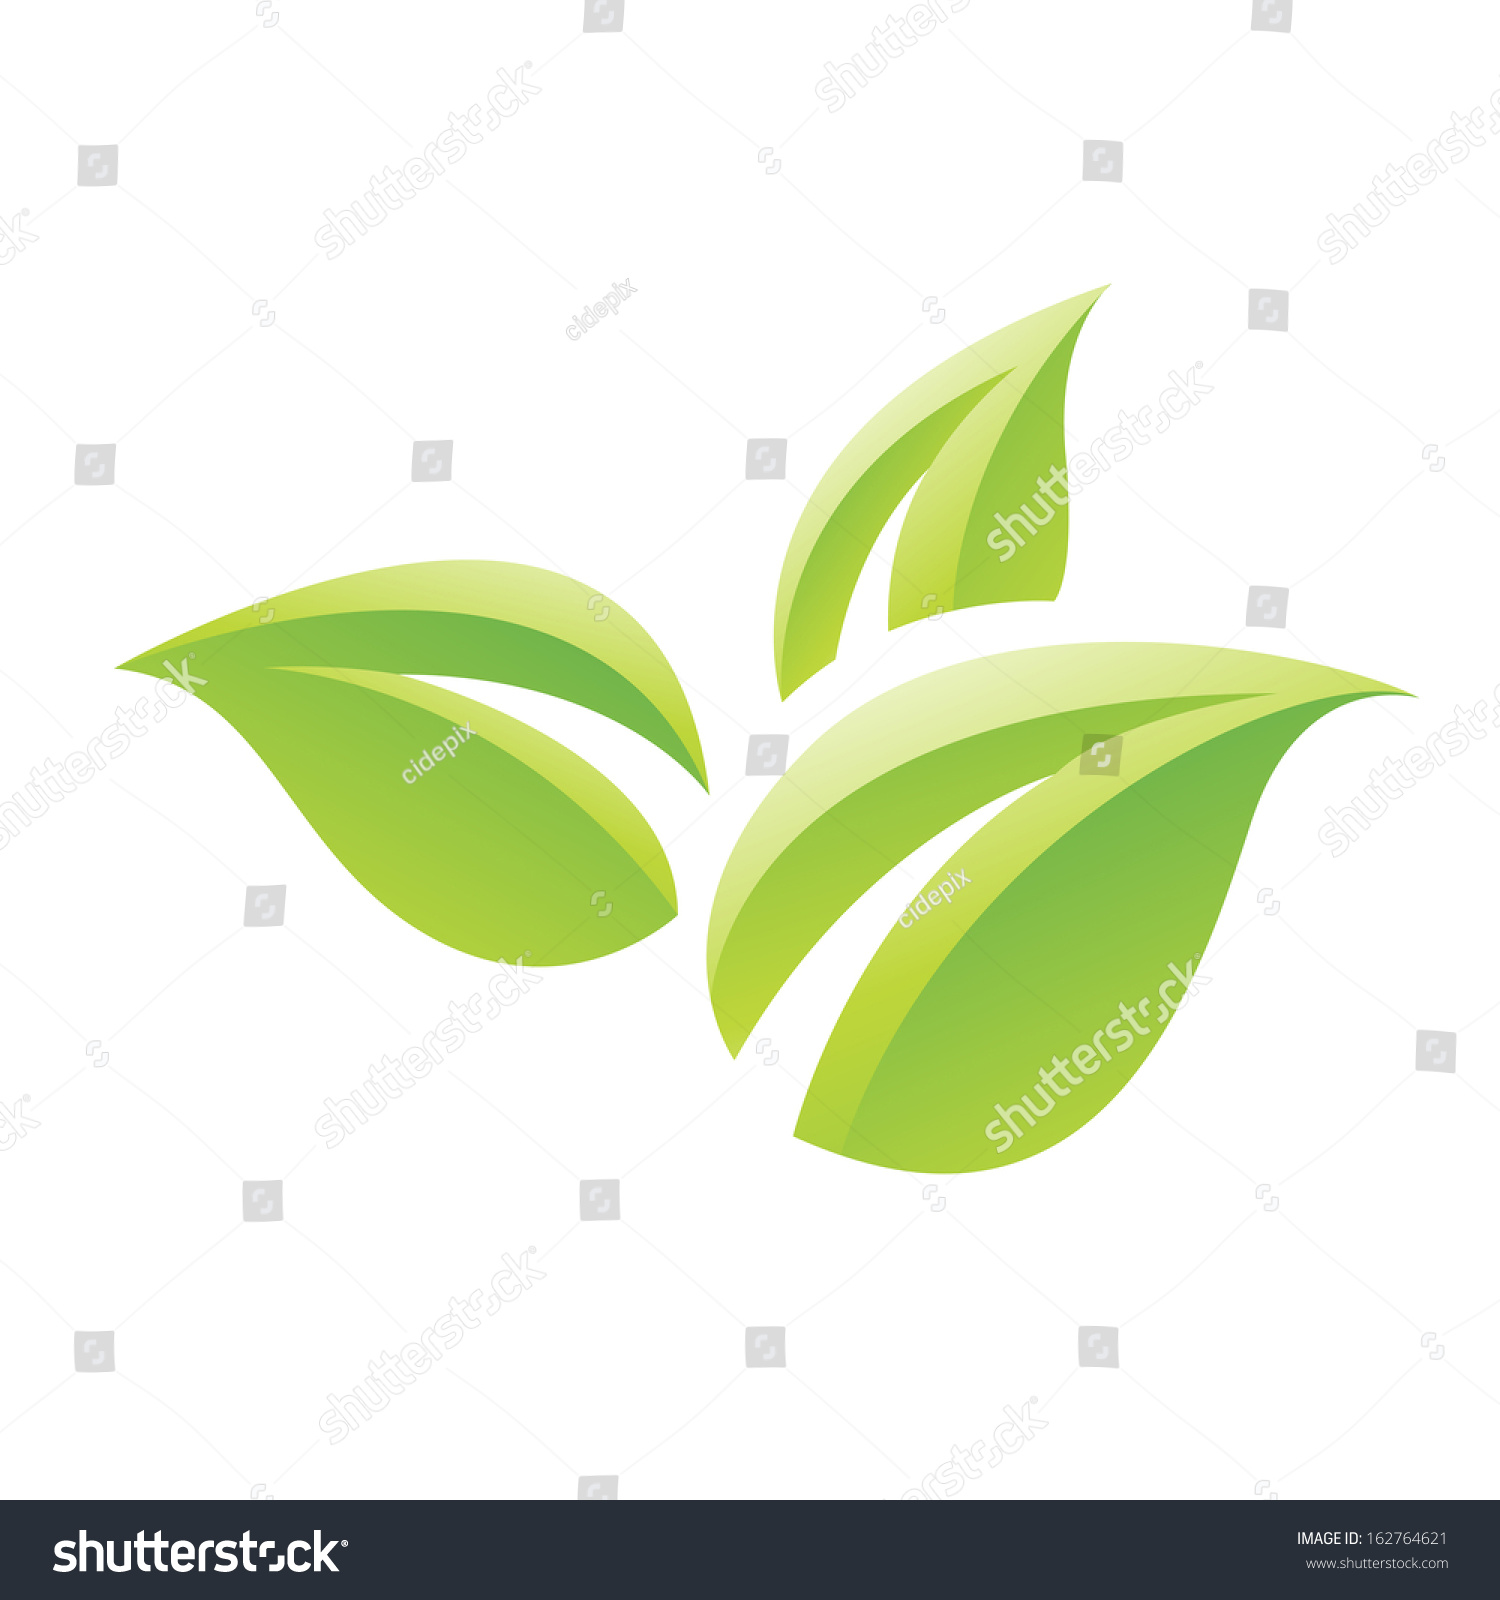 Illustration Of Green Glossy Leaves Icon Isolated On A White Background ...